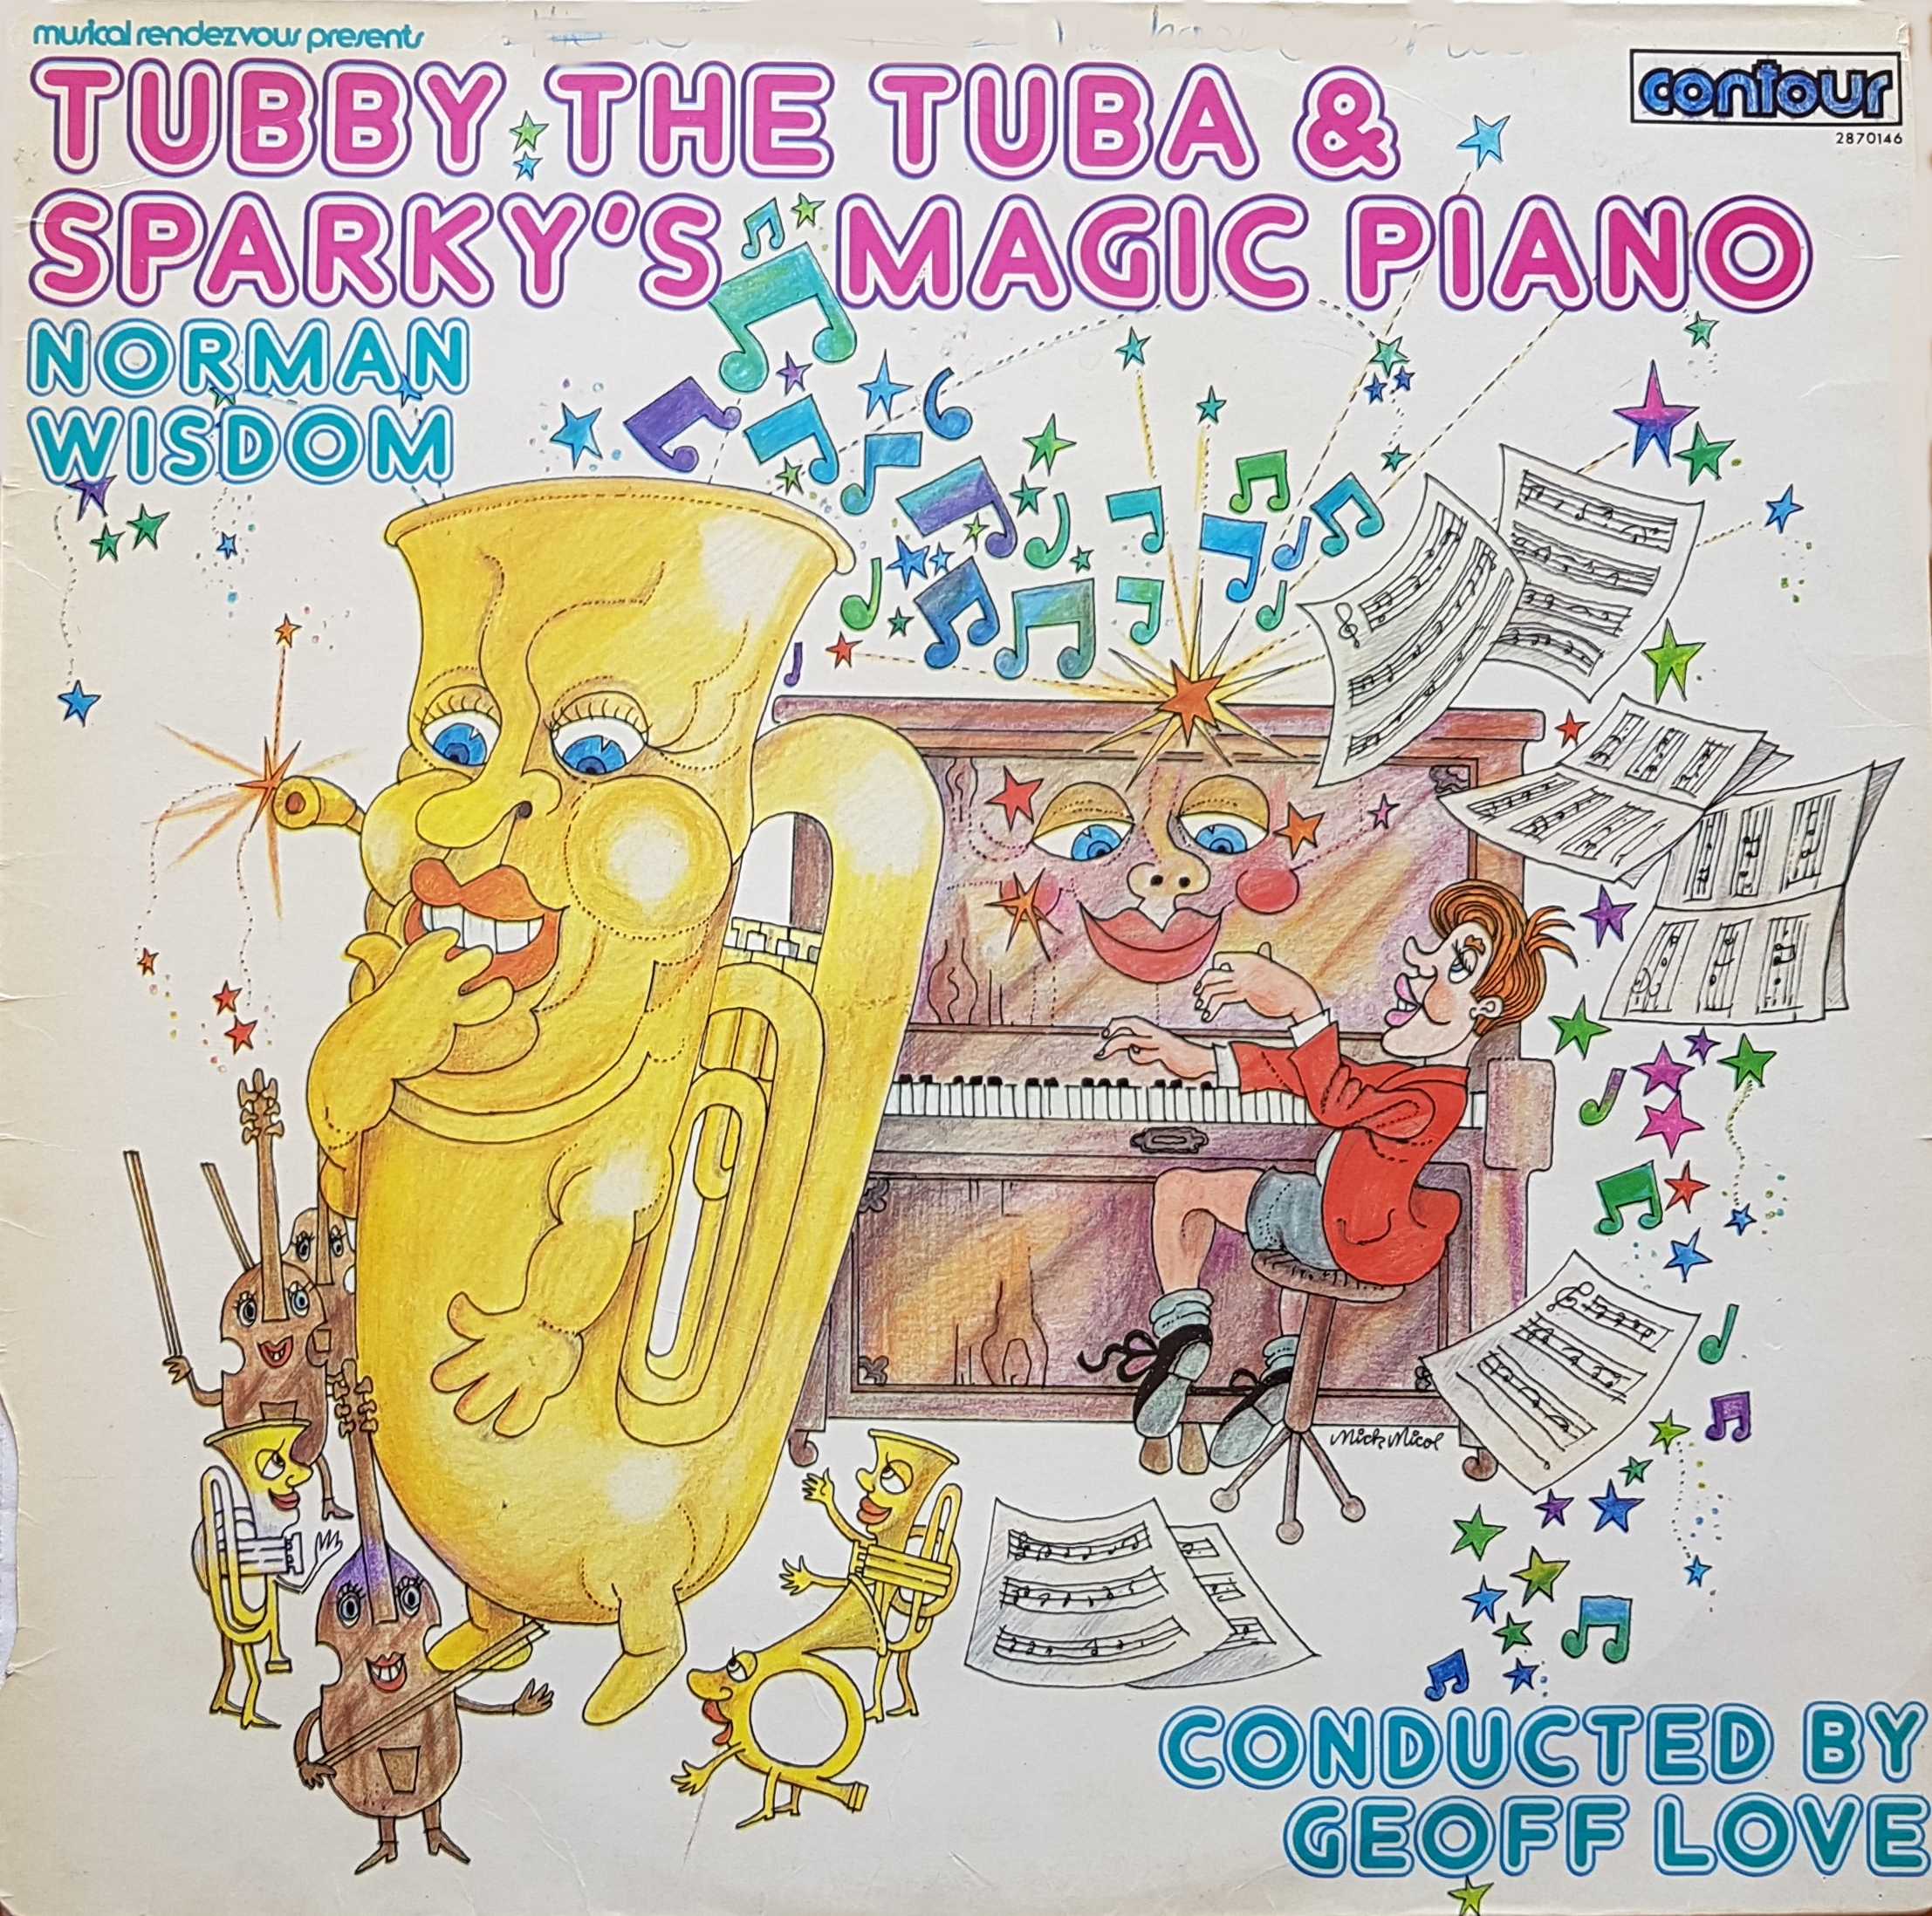 Picture of C 2870146 Tubby the tuba & Sparky's magic piano by artist Kleinsinger-Tripp / Alan Livingston from ITV, Channel 4 and Channel 5 albums library